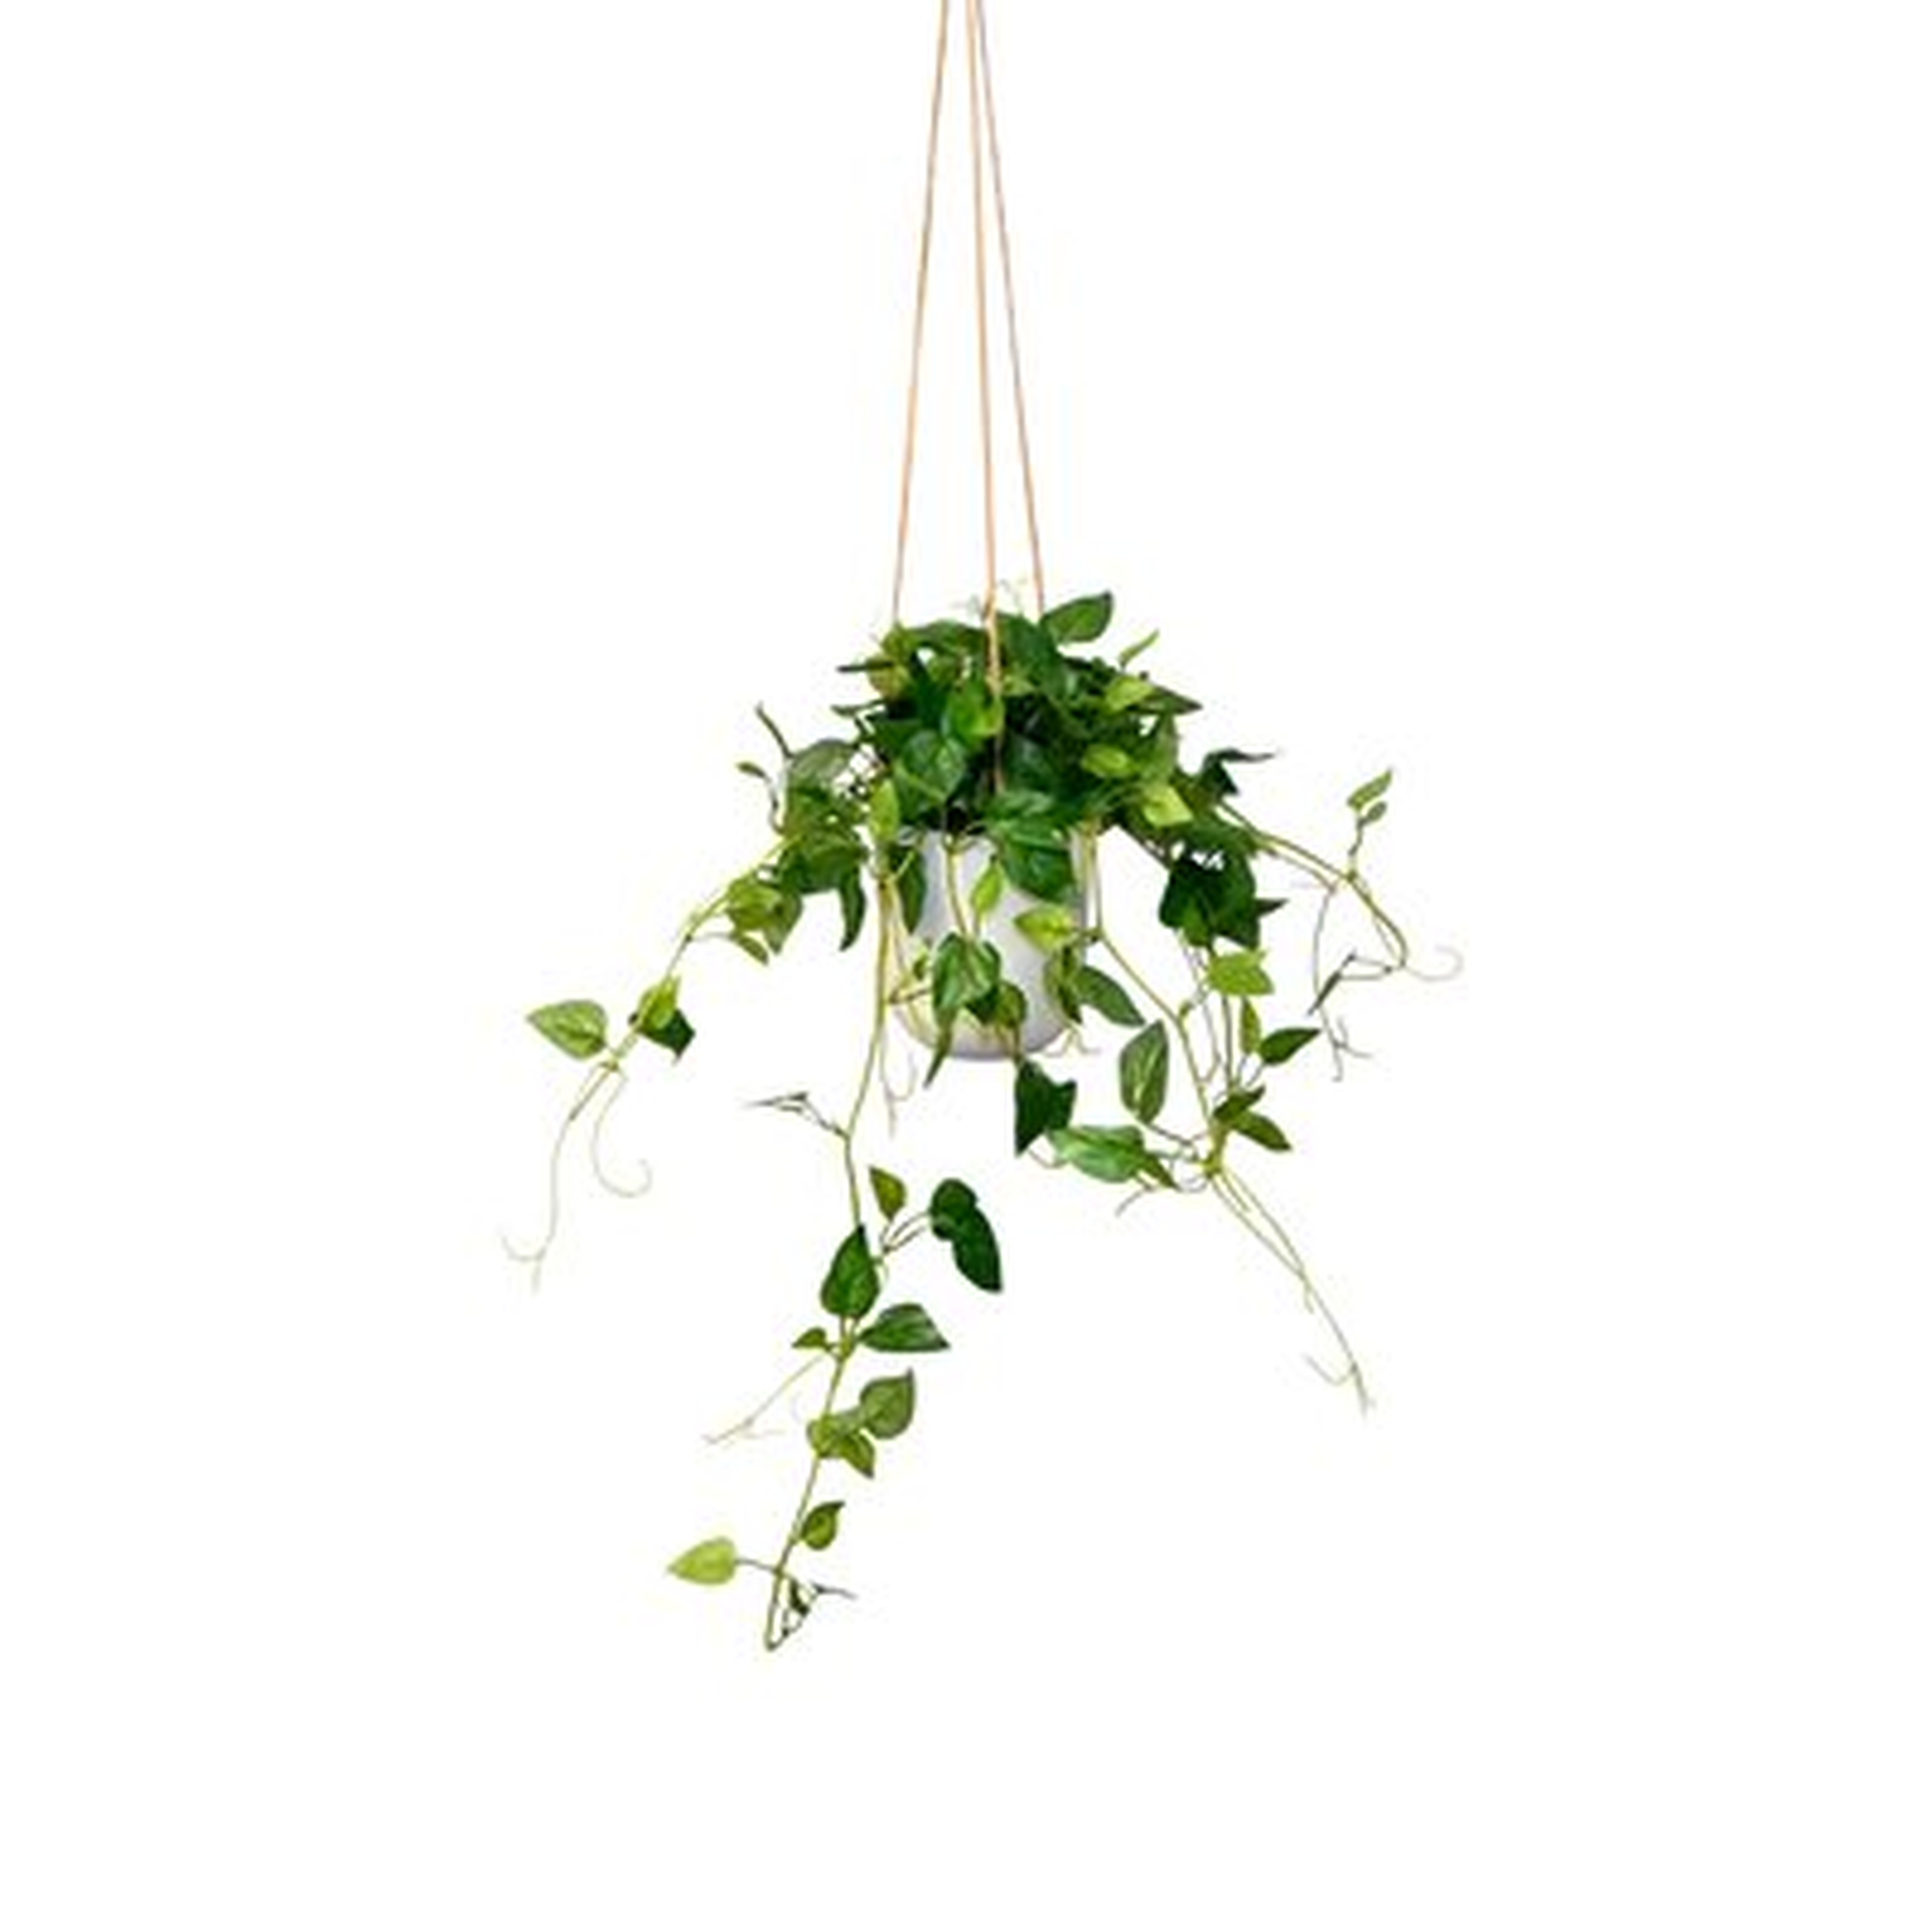 Hanging Philodendron Ivy Plant in Pot - Wayfair